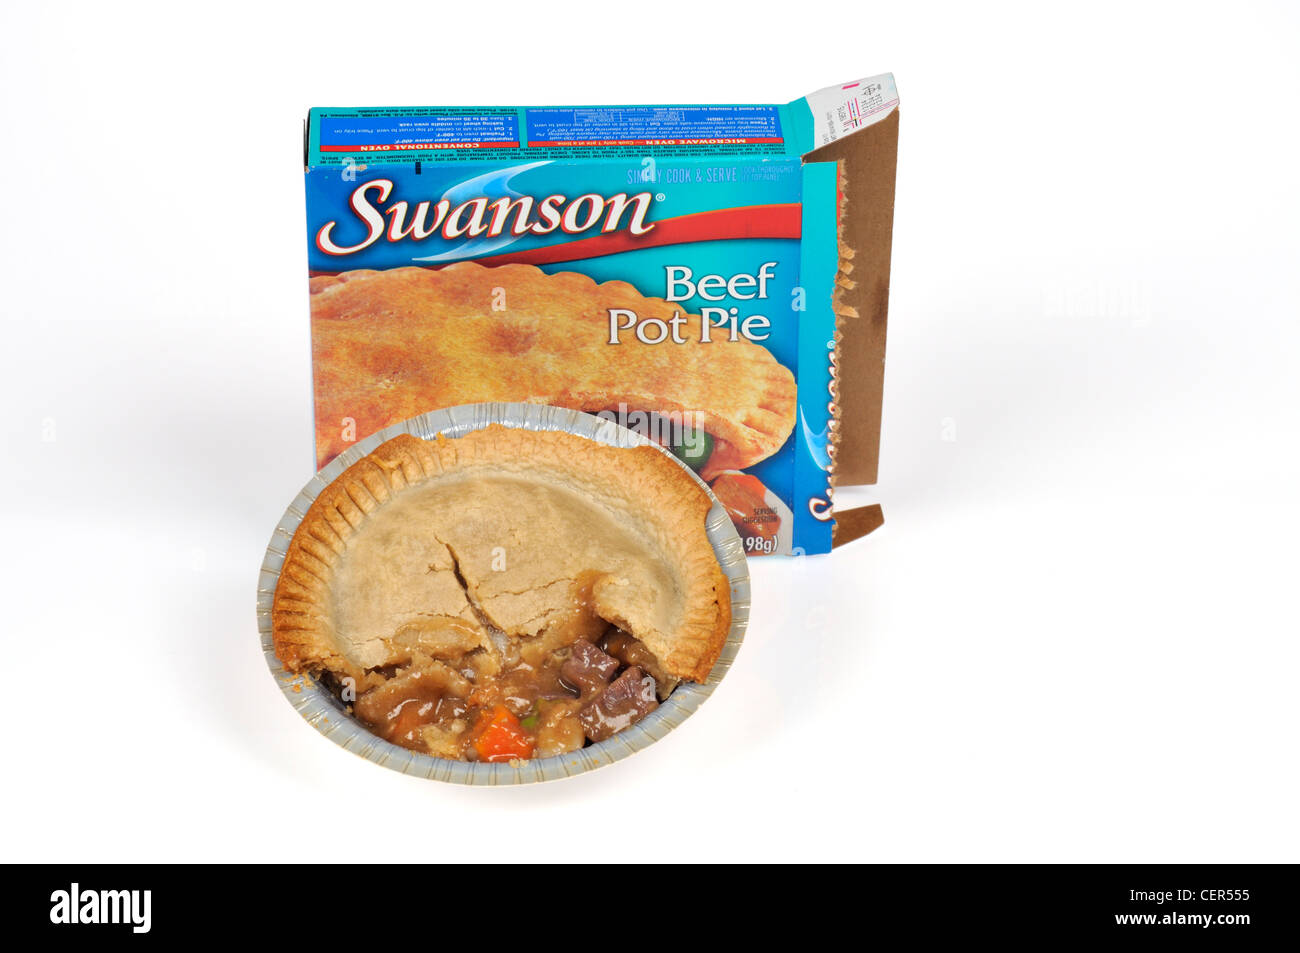 Cooked Swanson beef pot pie tv dinner in front of packaging on white background cut out. Stock Photo